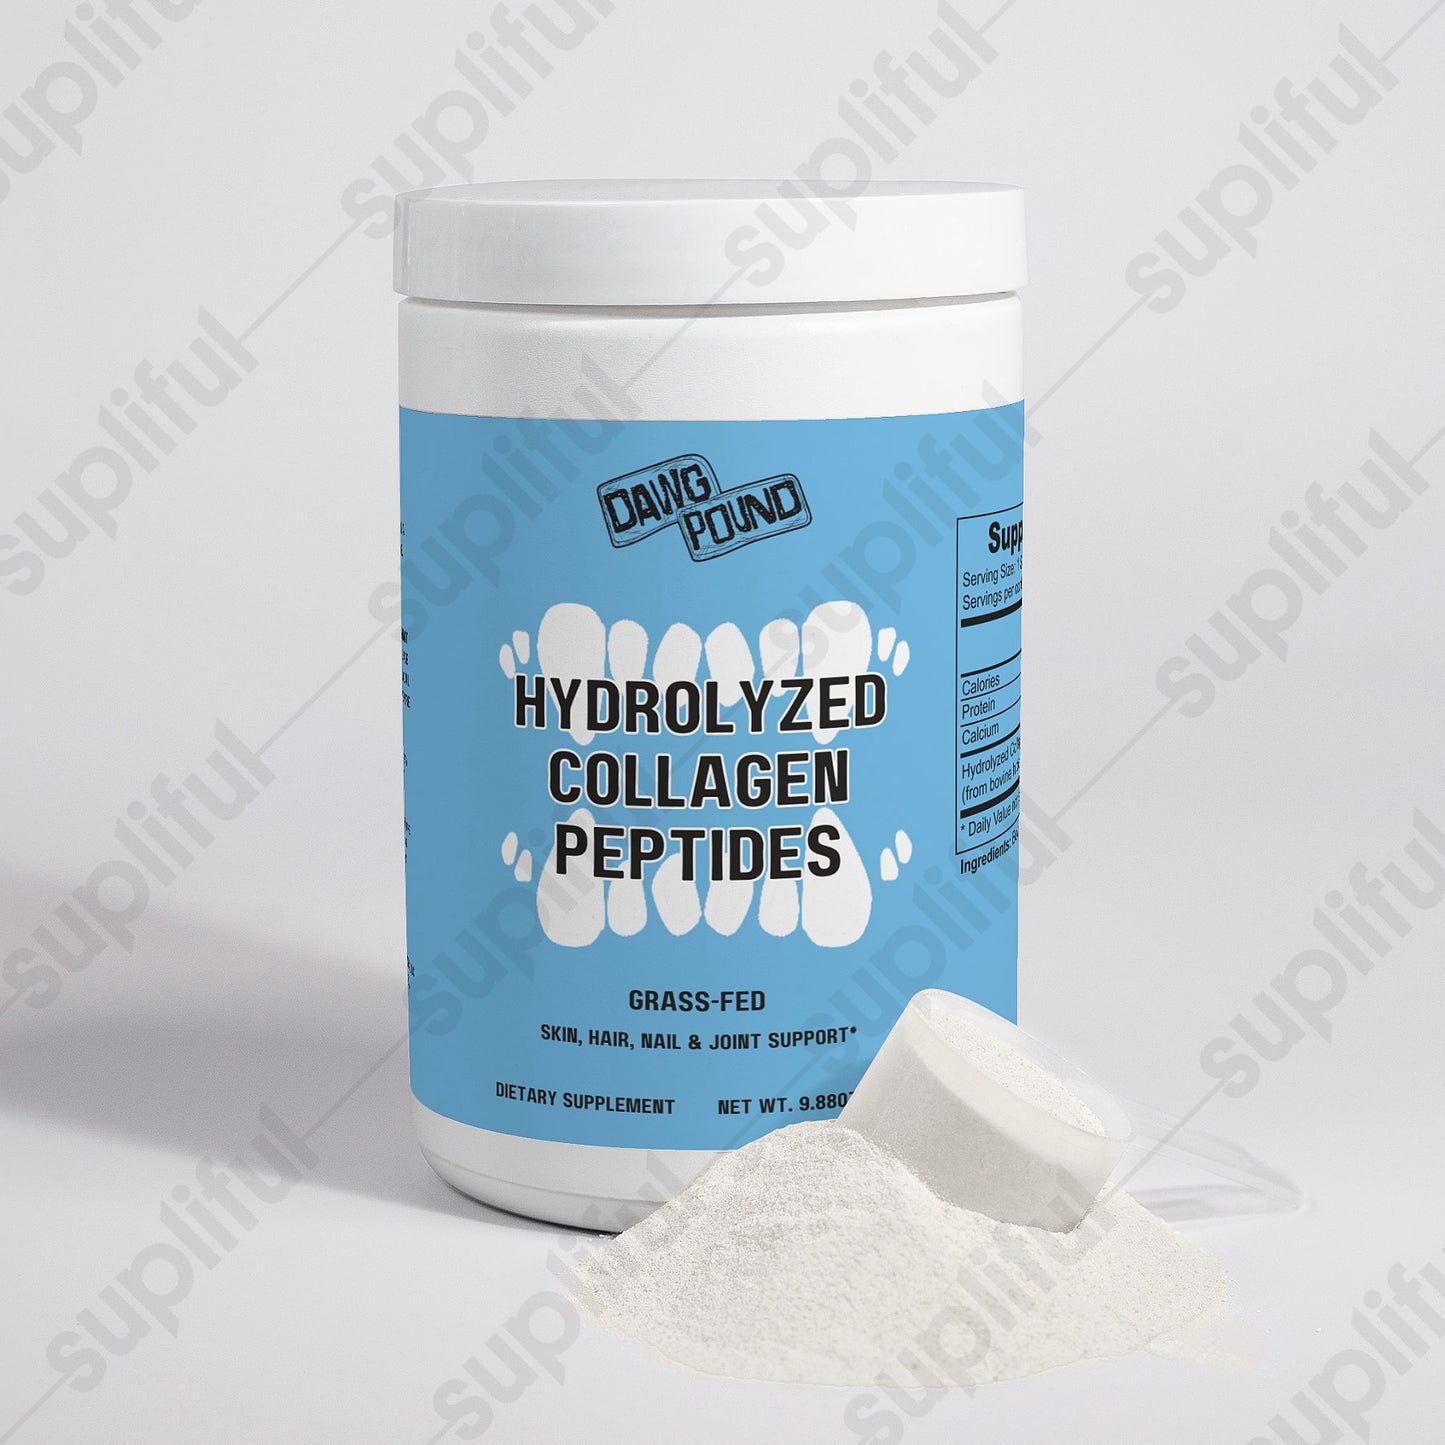 Dawg Pound Grass-Fed Hydrolyzed Collagen Peptides - Front View with Powder and Scooper in Front